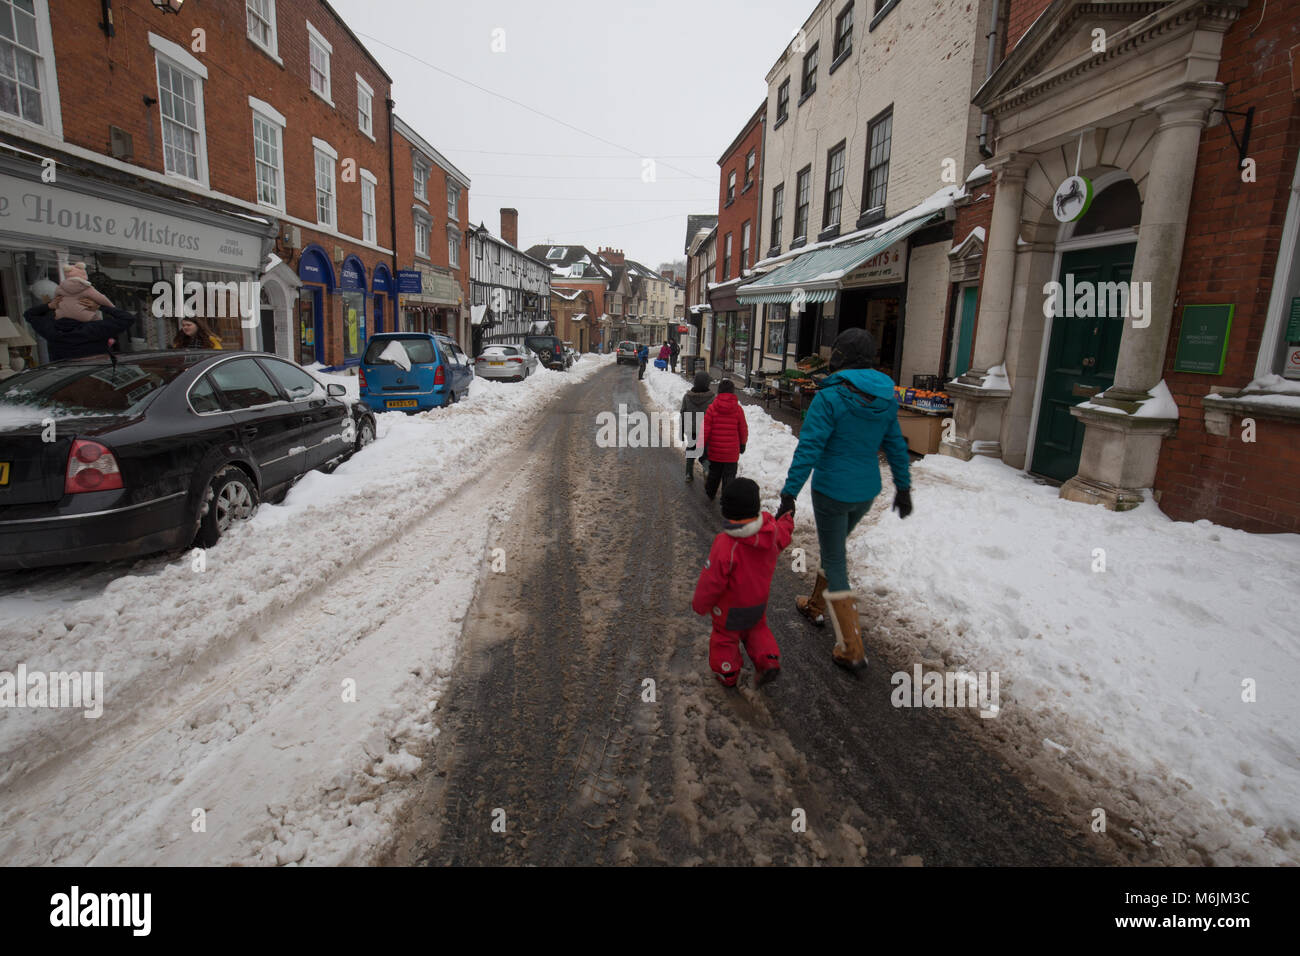 Local residents heading out and about in Bromyard. A rural town experiencing weather disruption in the winter of 2018. Stock Photo